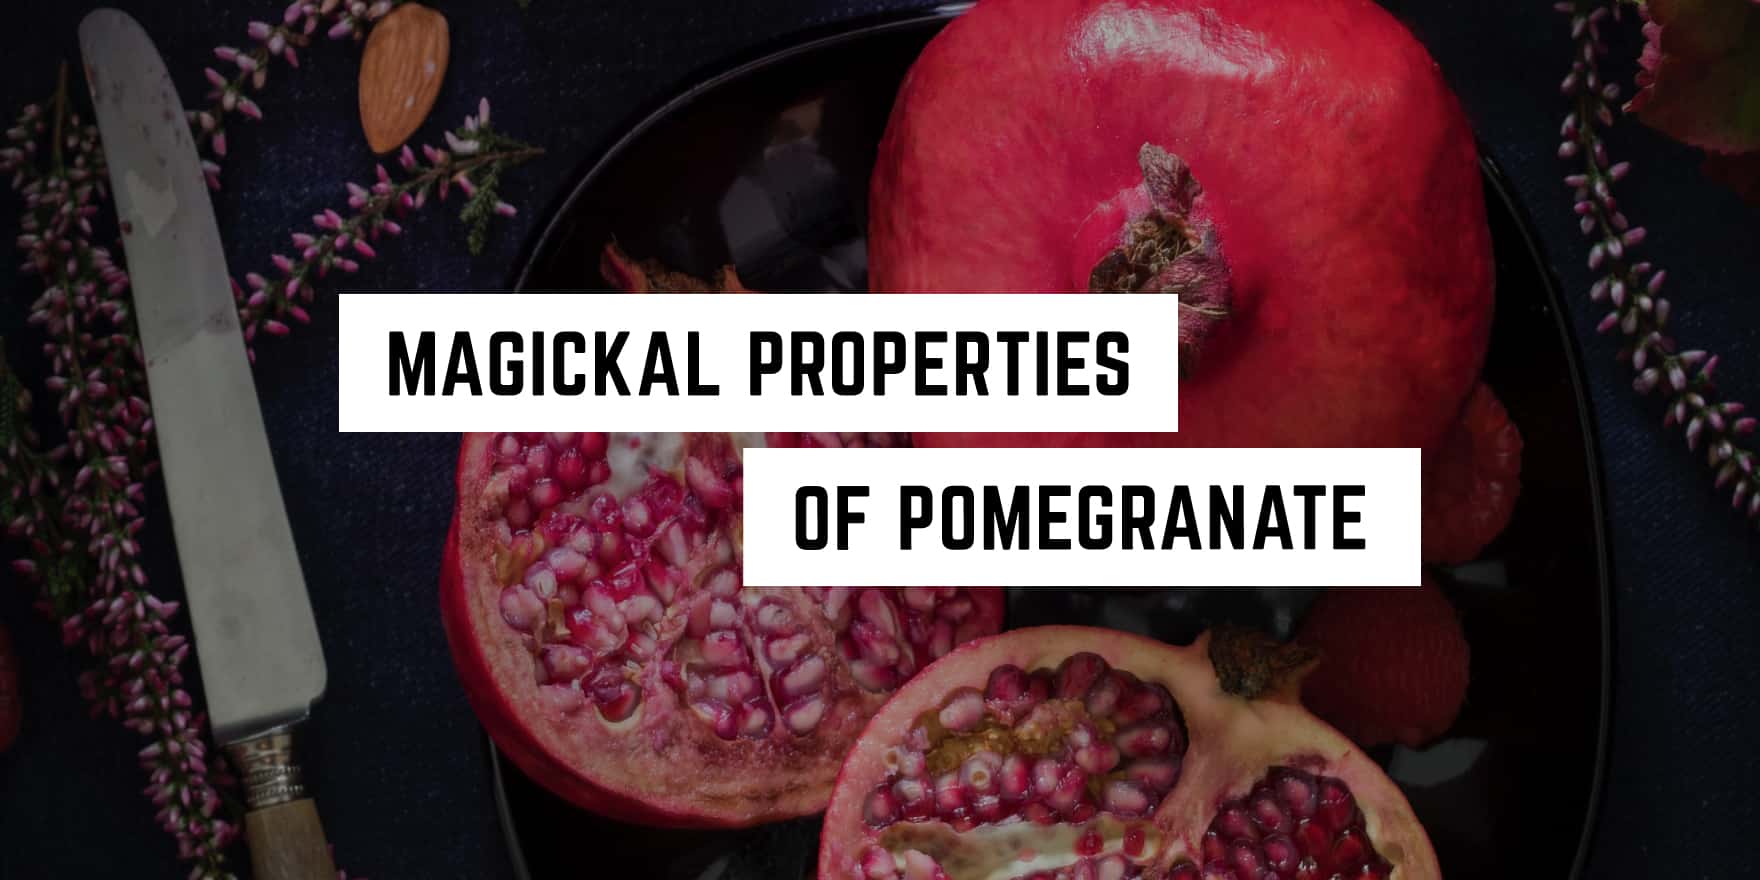 Pomegranate: unveil the witchy enchantment within.